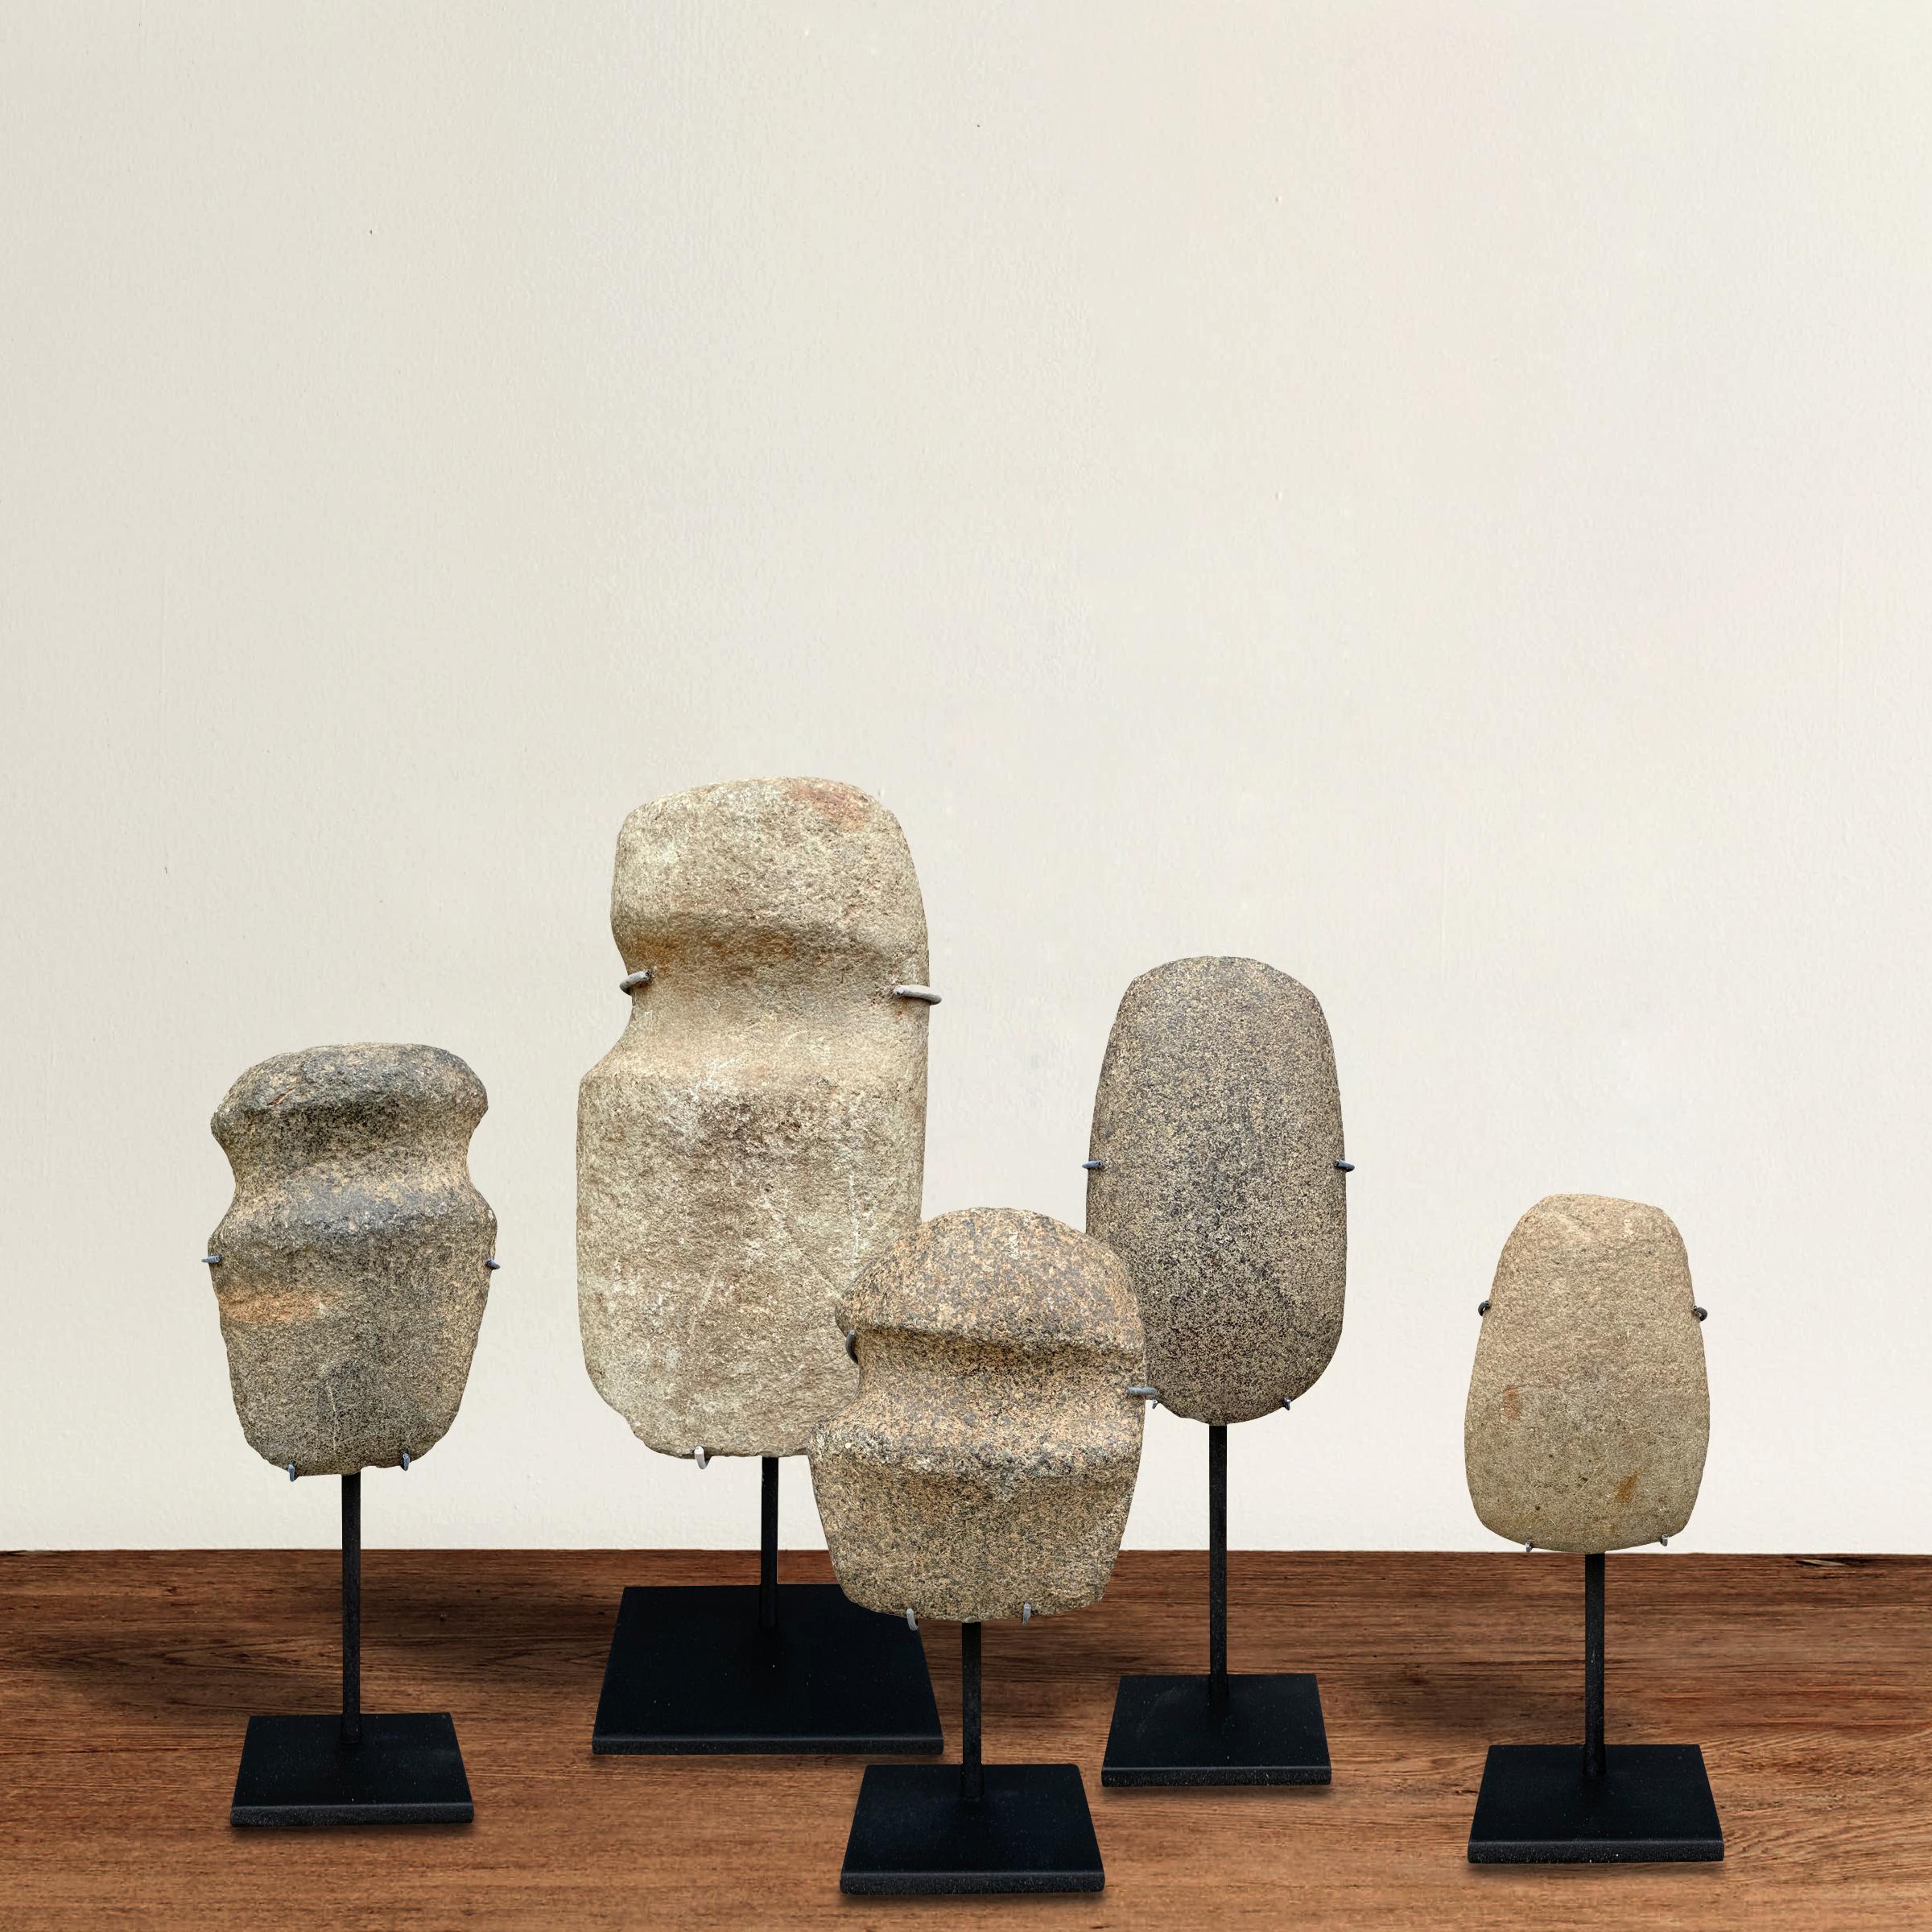 A beautiful stoic collection of Native American Neolithic hand carved stone axe heads with wonderfully sculptural forms, mounted on custom steel stands. Three of the axes have grooves cut into them which helped in tying the heads to wooden handles.